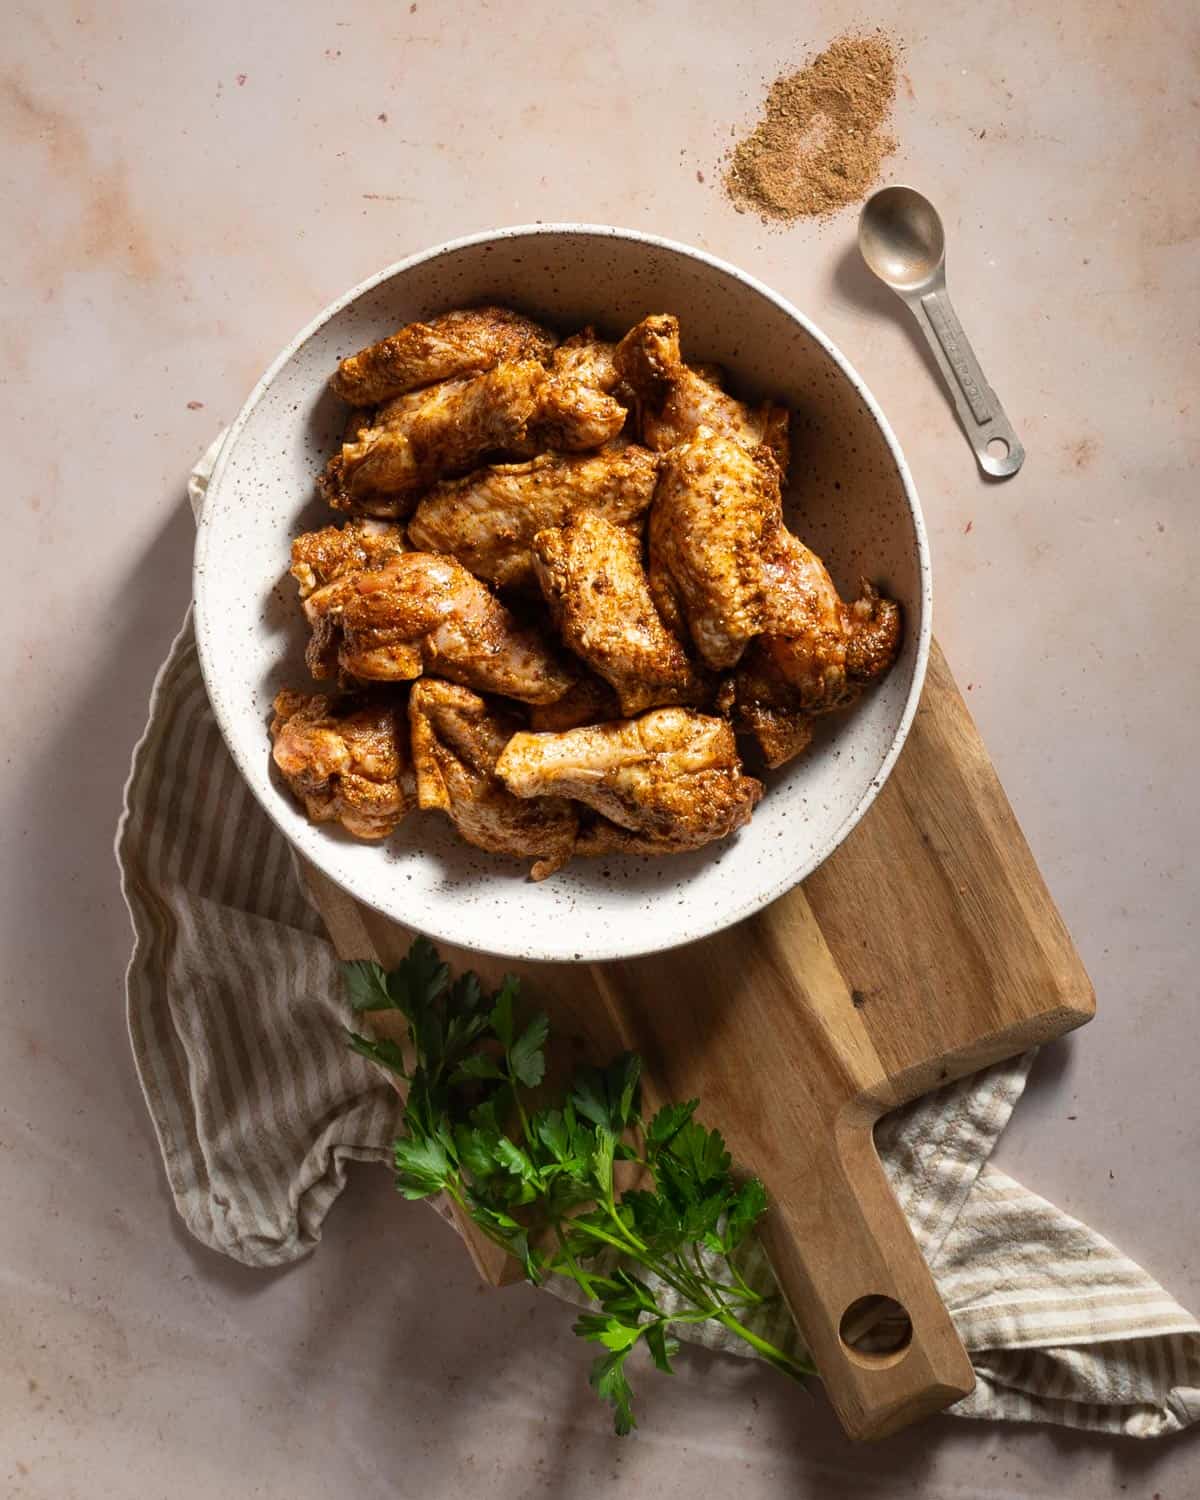 Raw chicken wings tossed in seasoning in a white bowl.